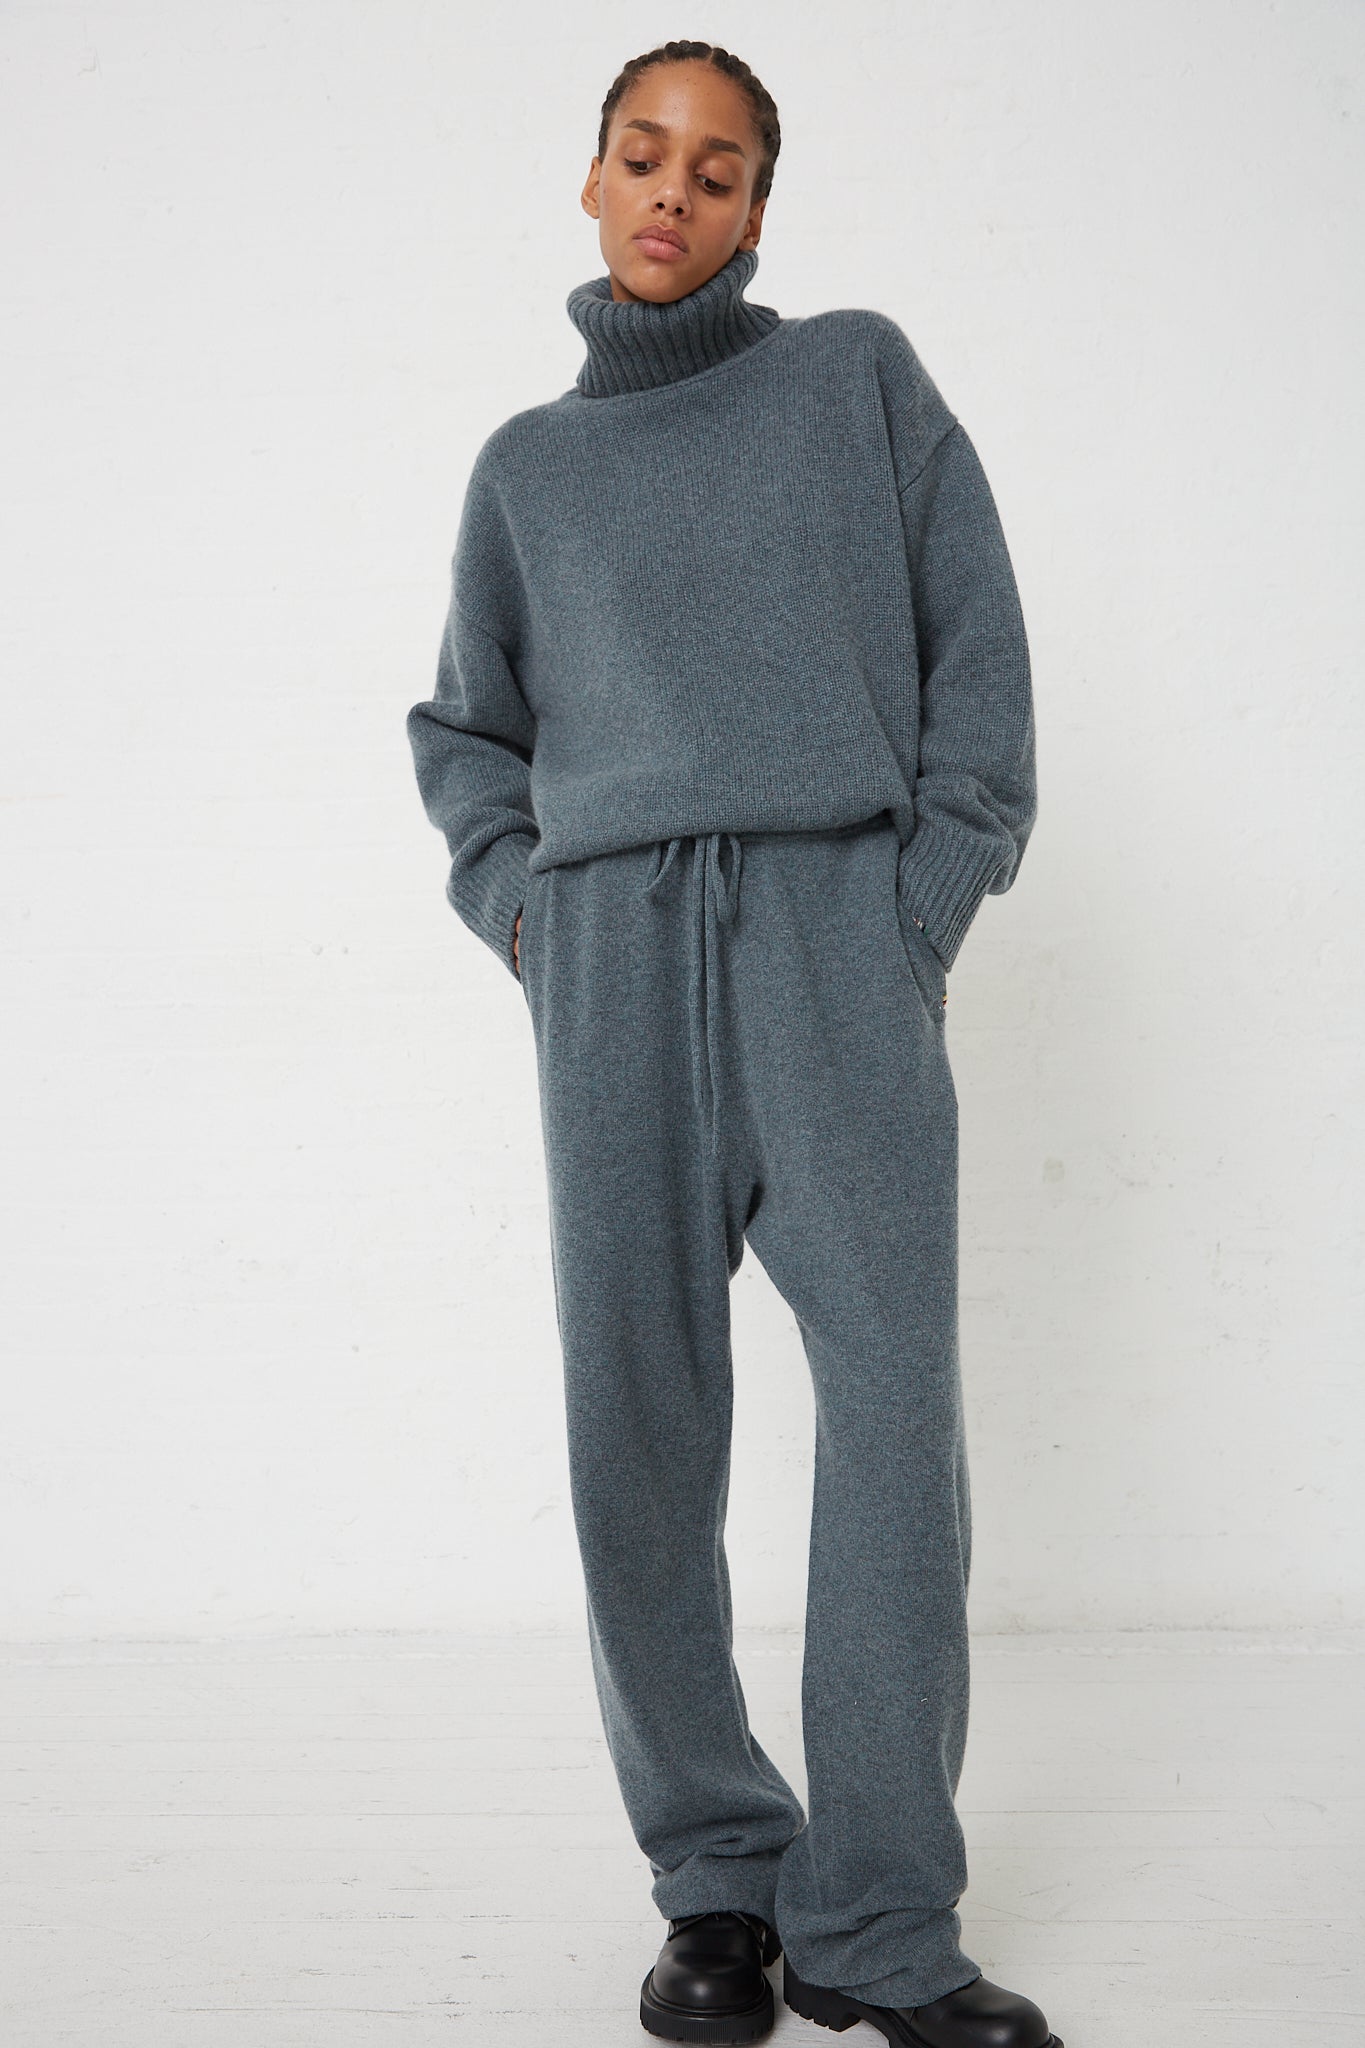 The model is wearing a grey turtleneck jumpsuit and Extreme Cashmere No. 320 Rush Trouser in Wave with a drawstring waist.